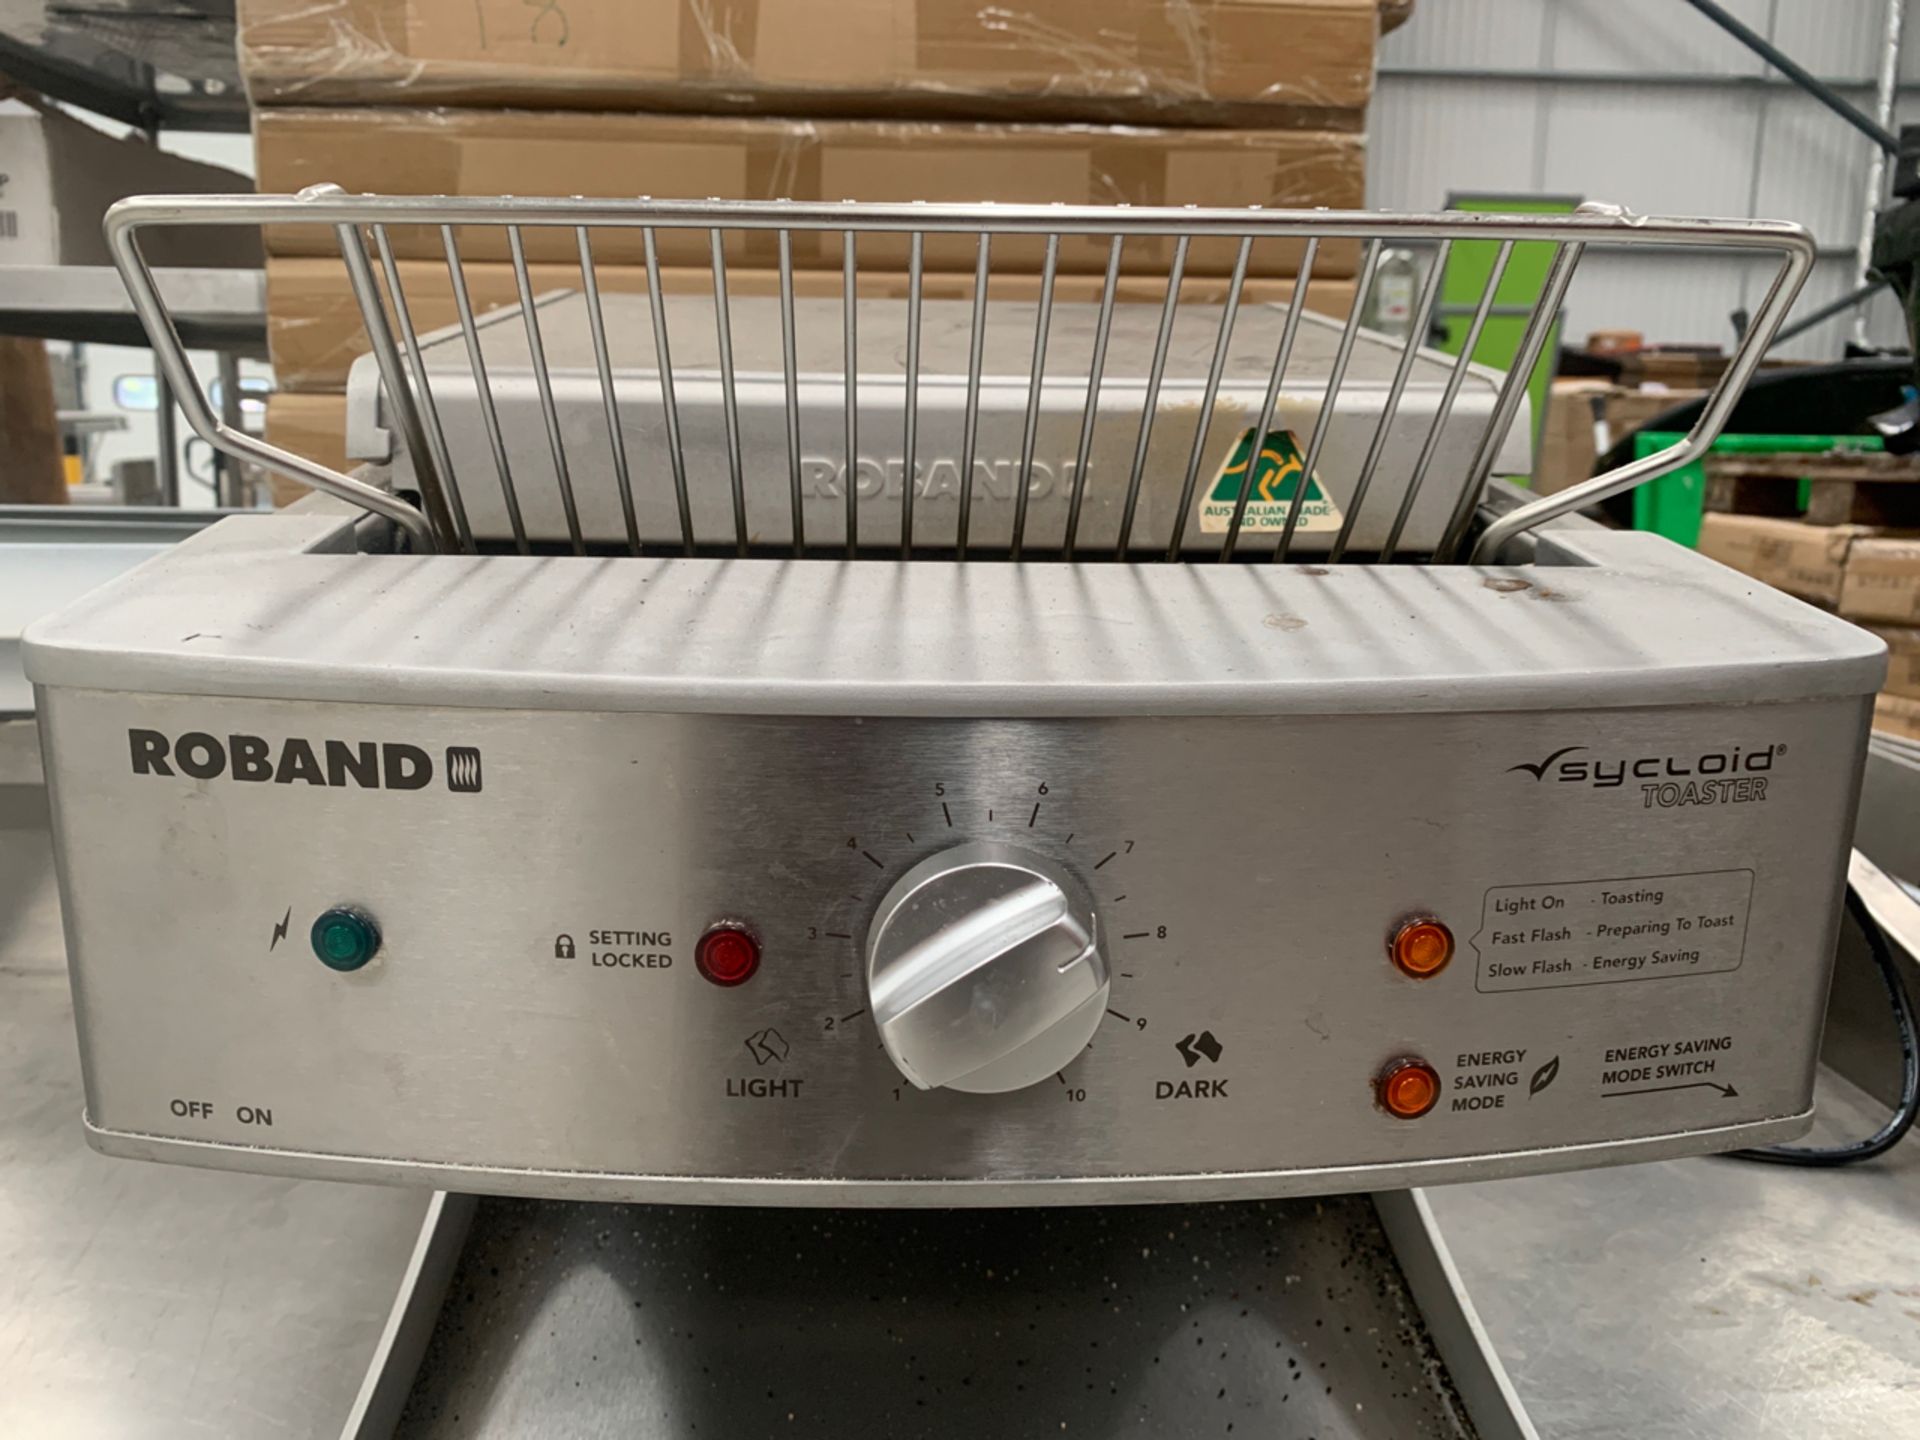 Roband Sycloid Stainless Steel Industrial Toaster - Image 3 of 5